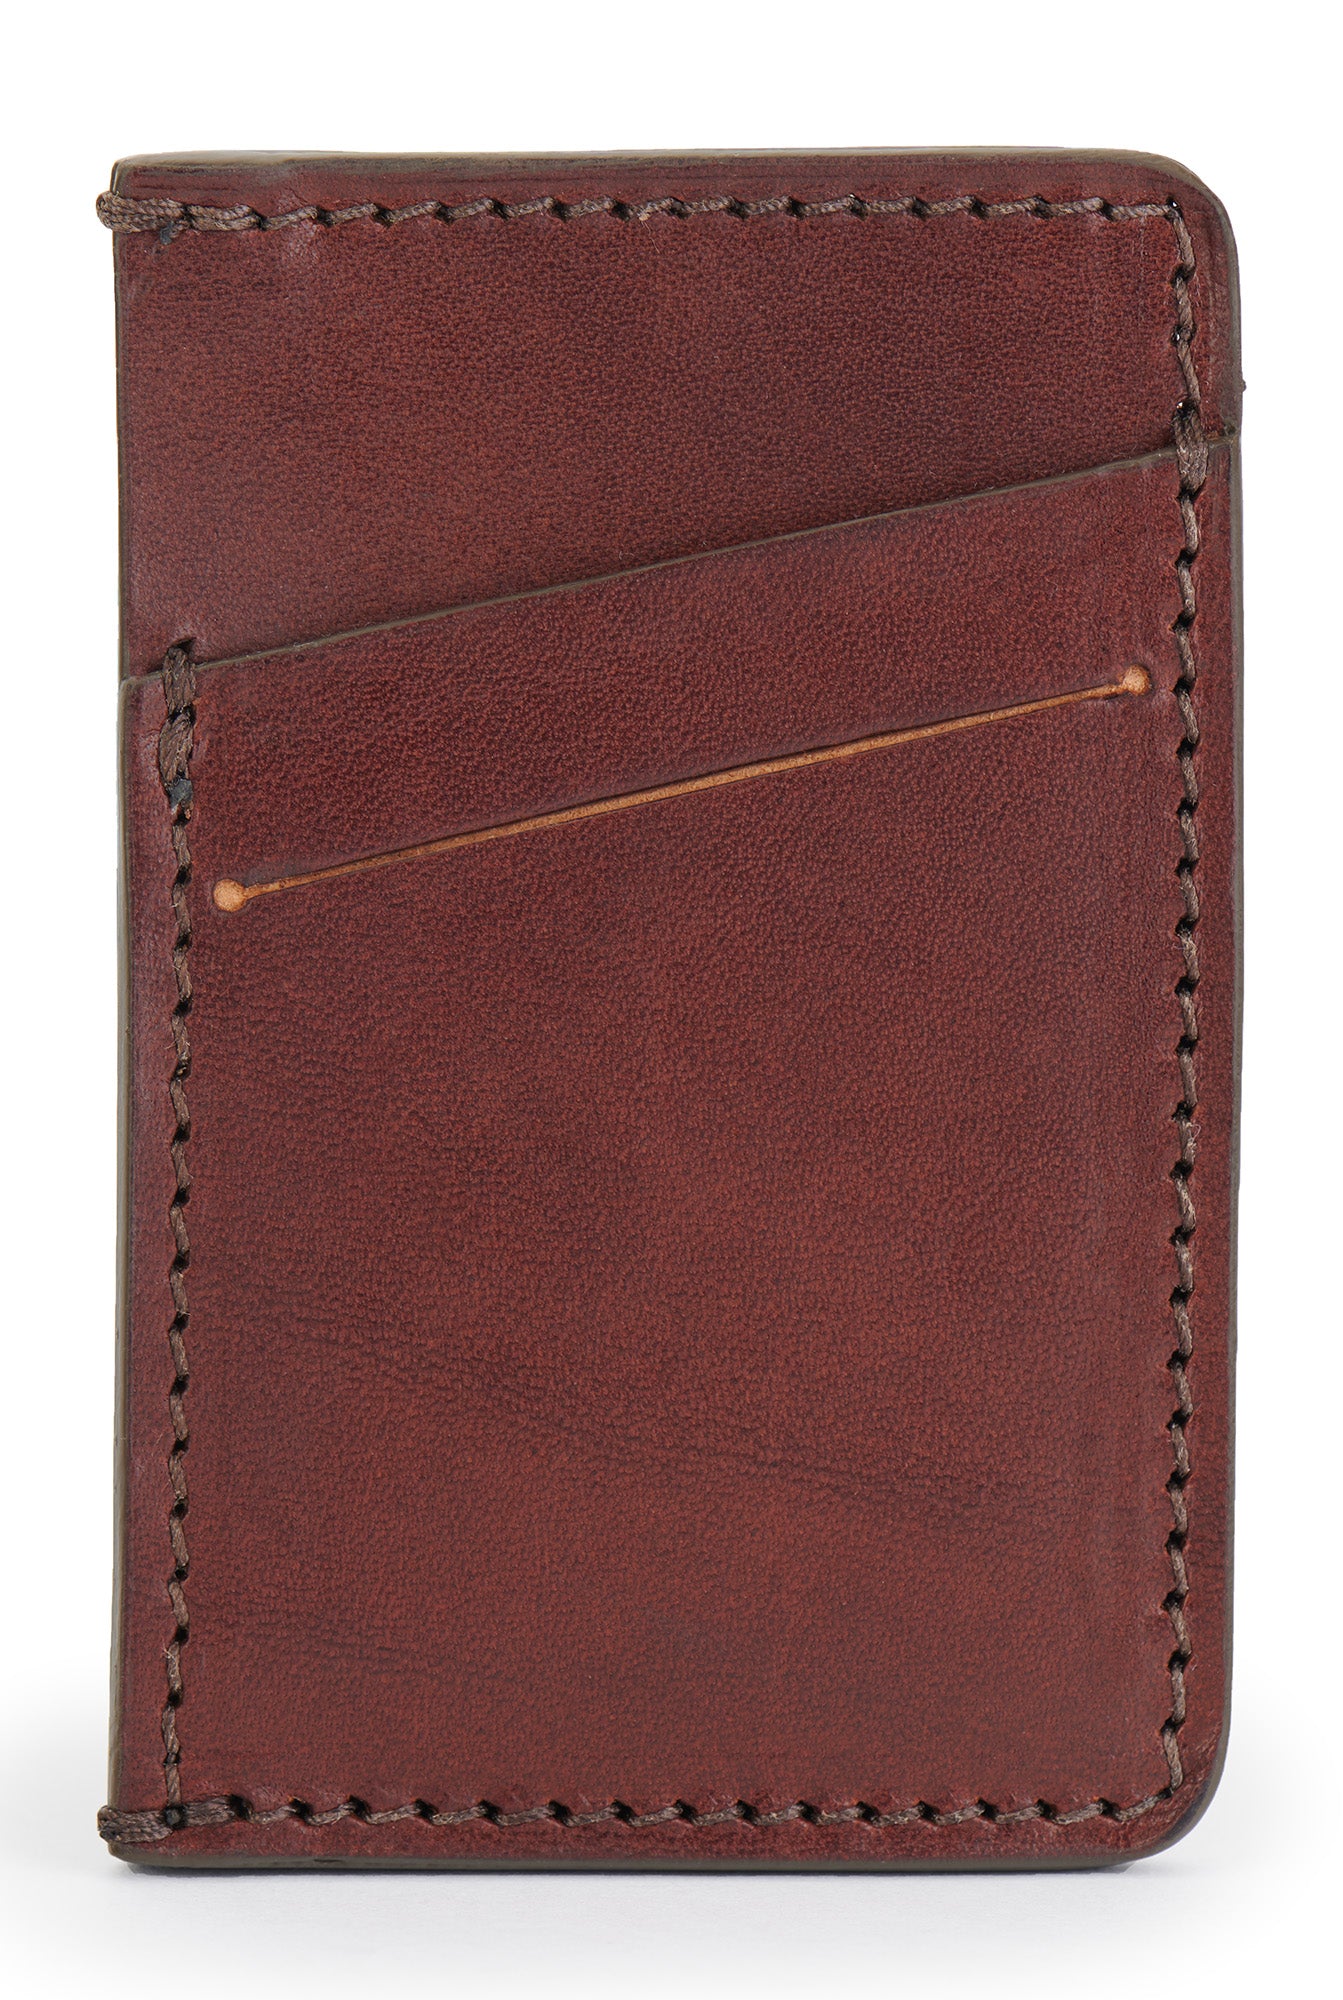 full grain leather minimalist wallet front empty pictured in vintage brown